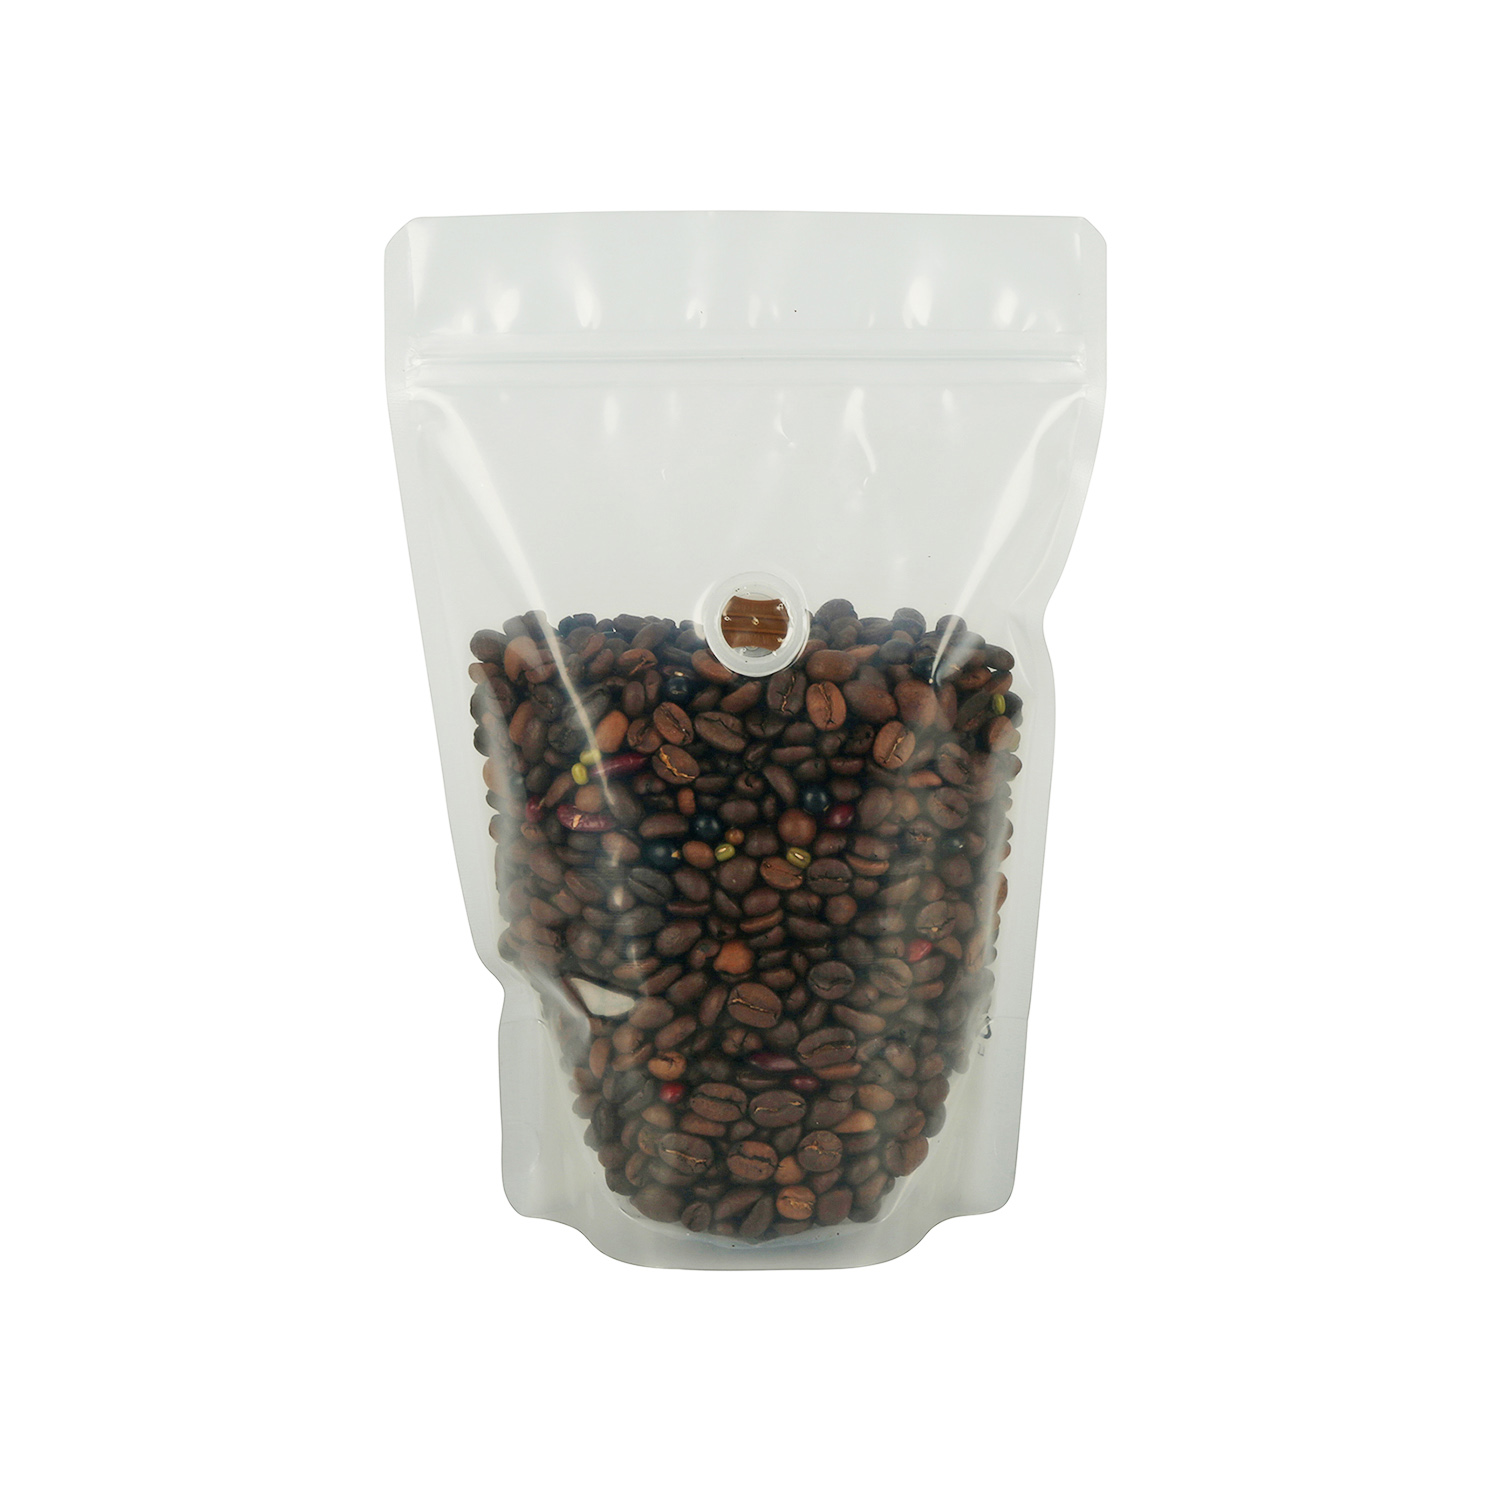 Carbon Negative Bio Based Sugarcane Material Recyclable Coffee Bag with Degassing Valve